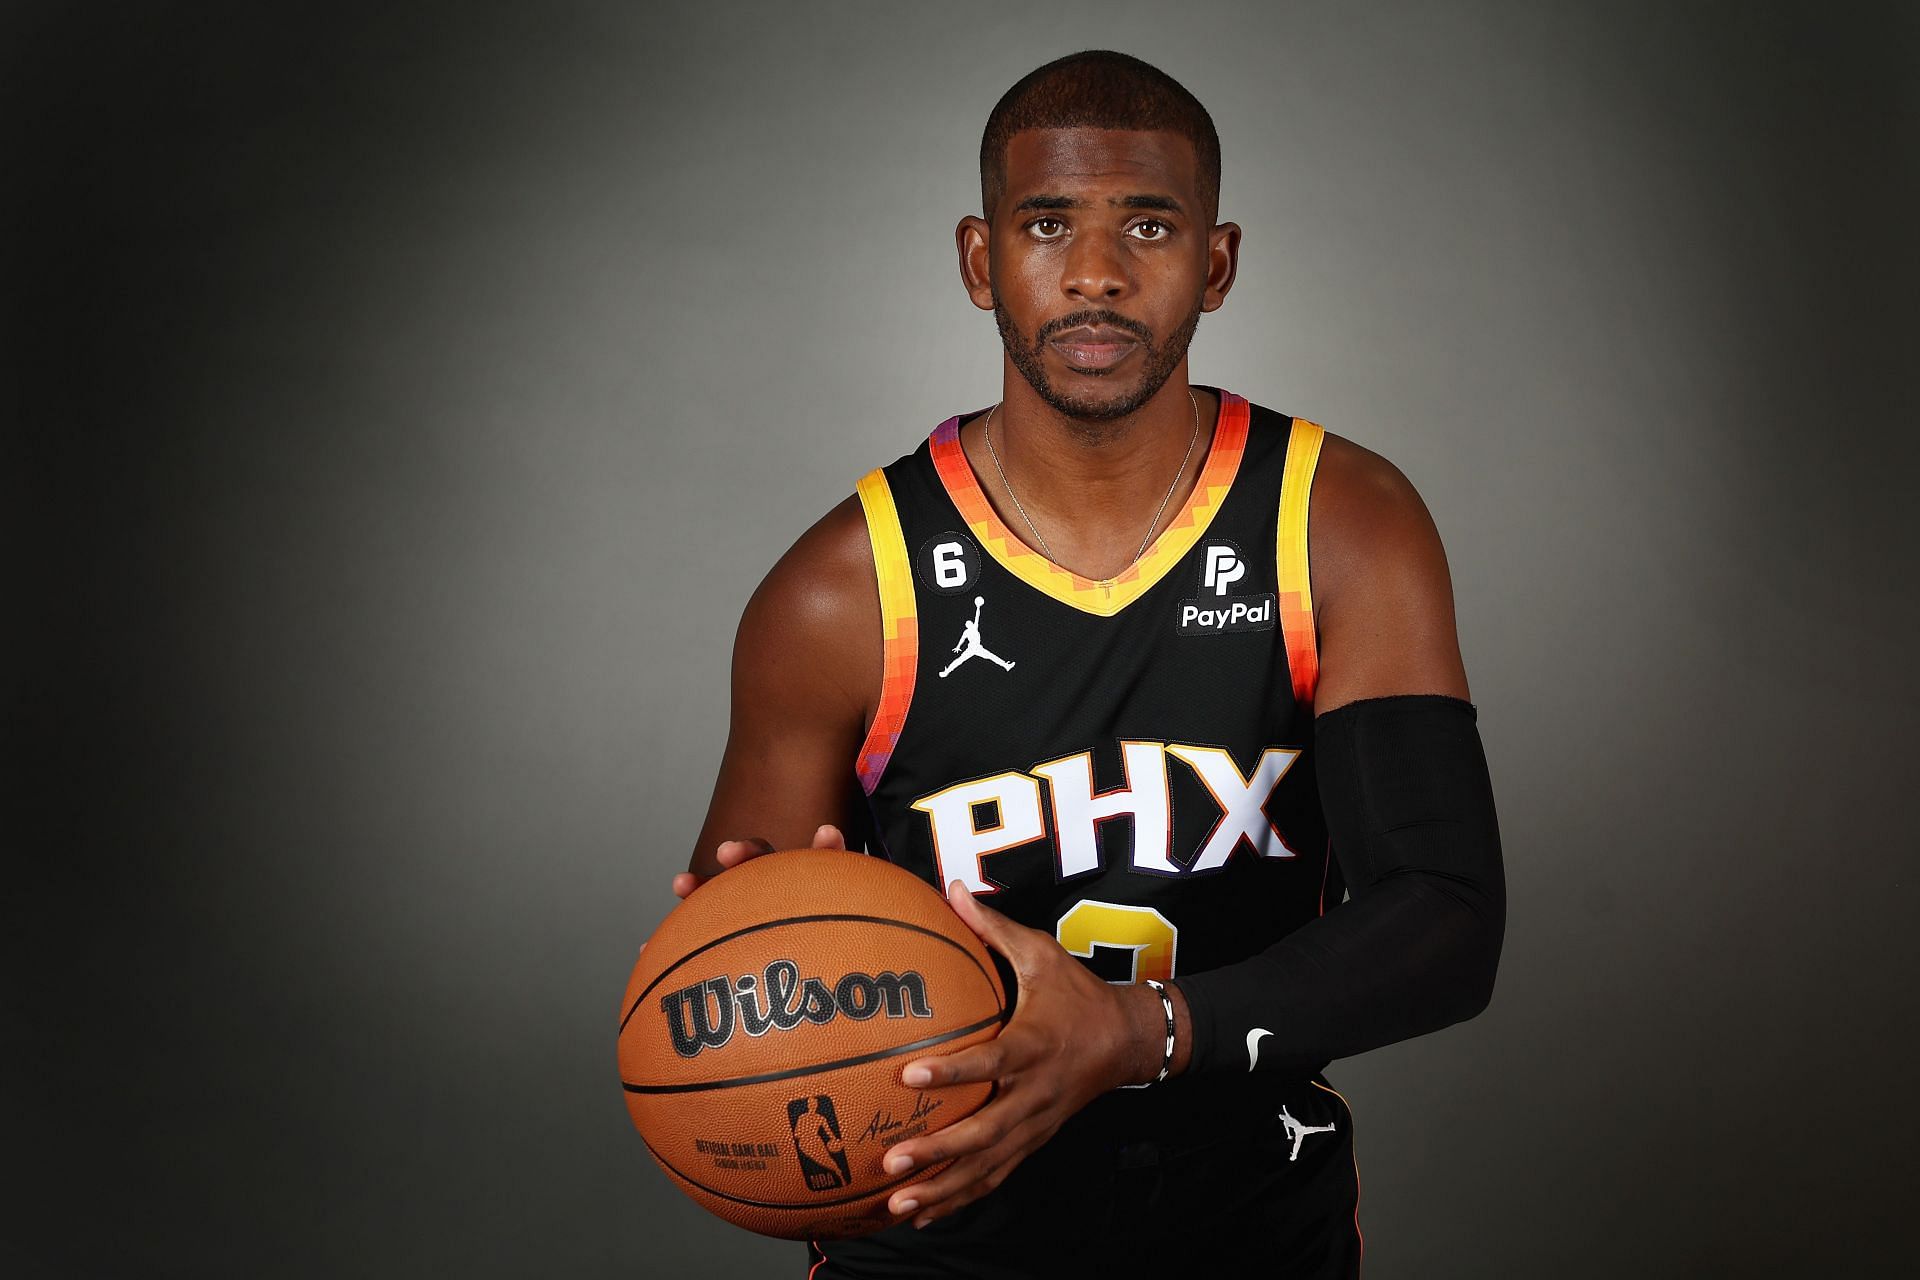 Chris Paul is now a member of the Golden State Warriors